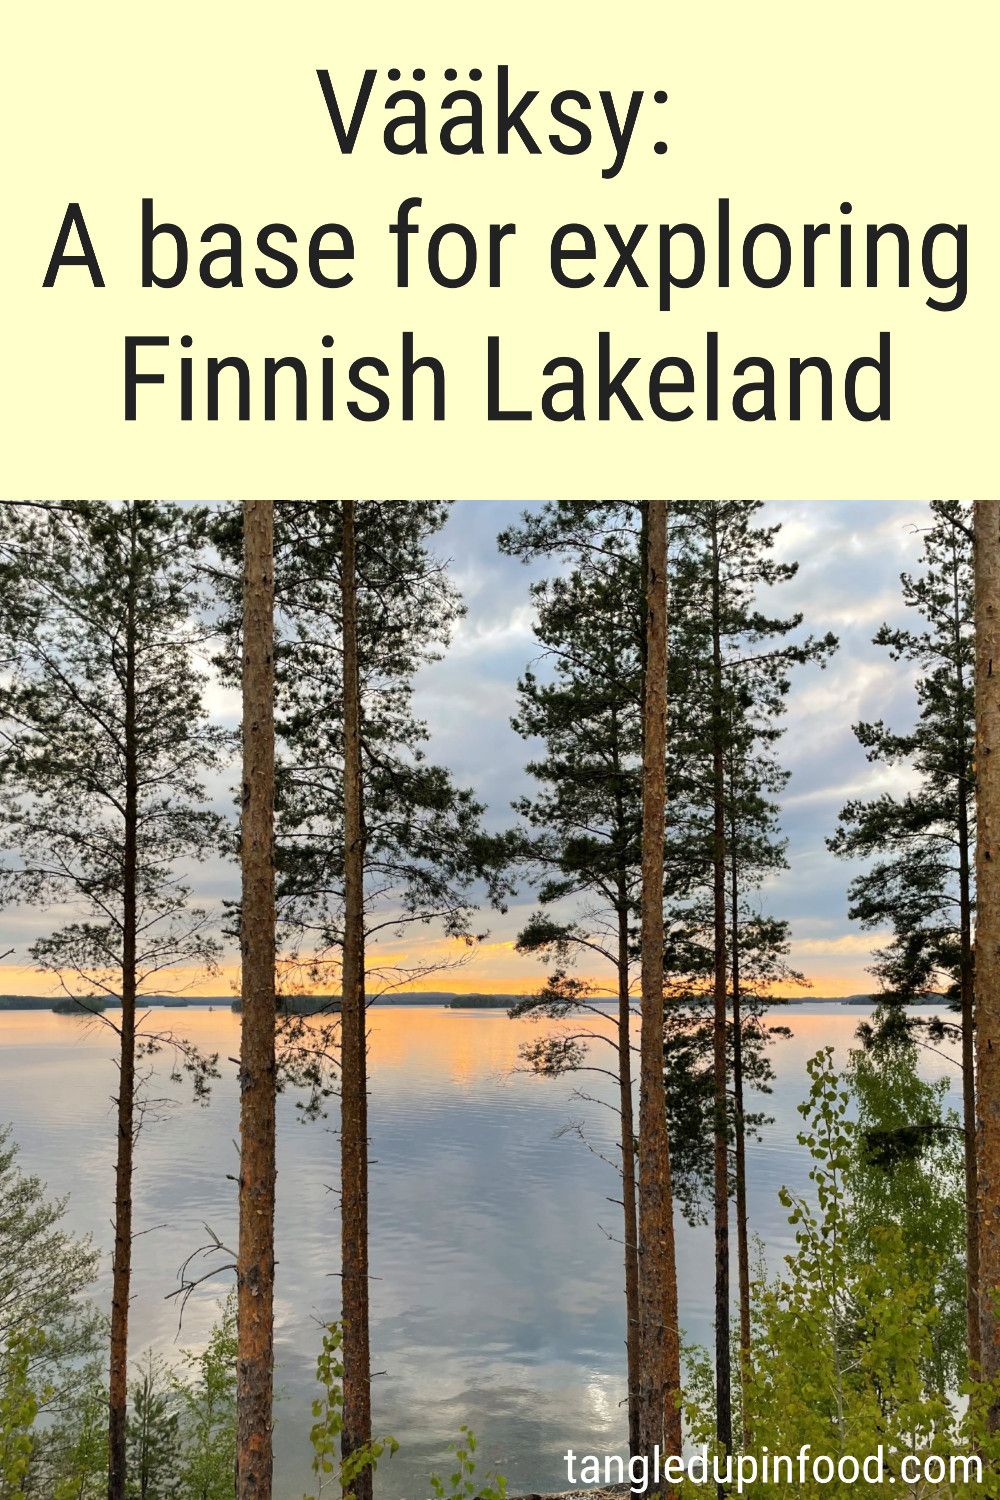 Sunset over a lake with pine trees in the foreground and text reading "Vaaksy: A base for exploring Finnish Lakeland"